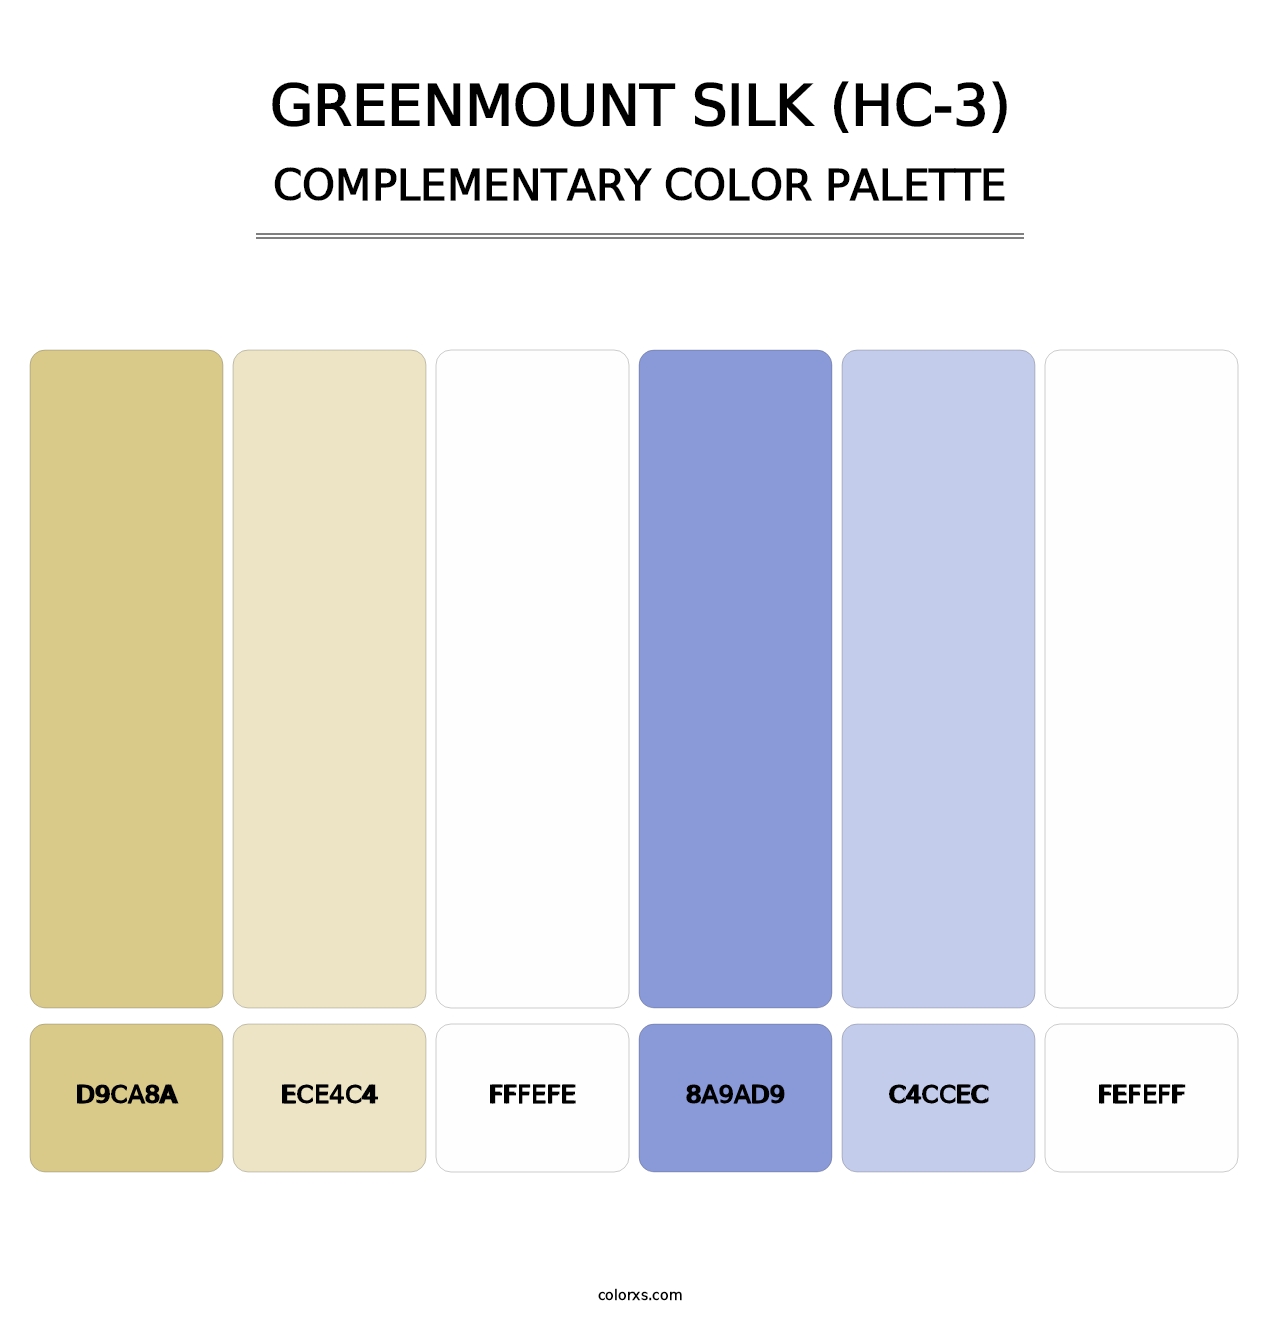 Greenmount Silk (HC-3) - Complementary Color Palette